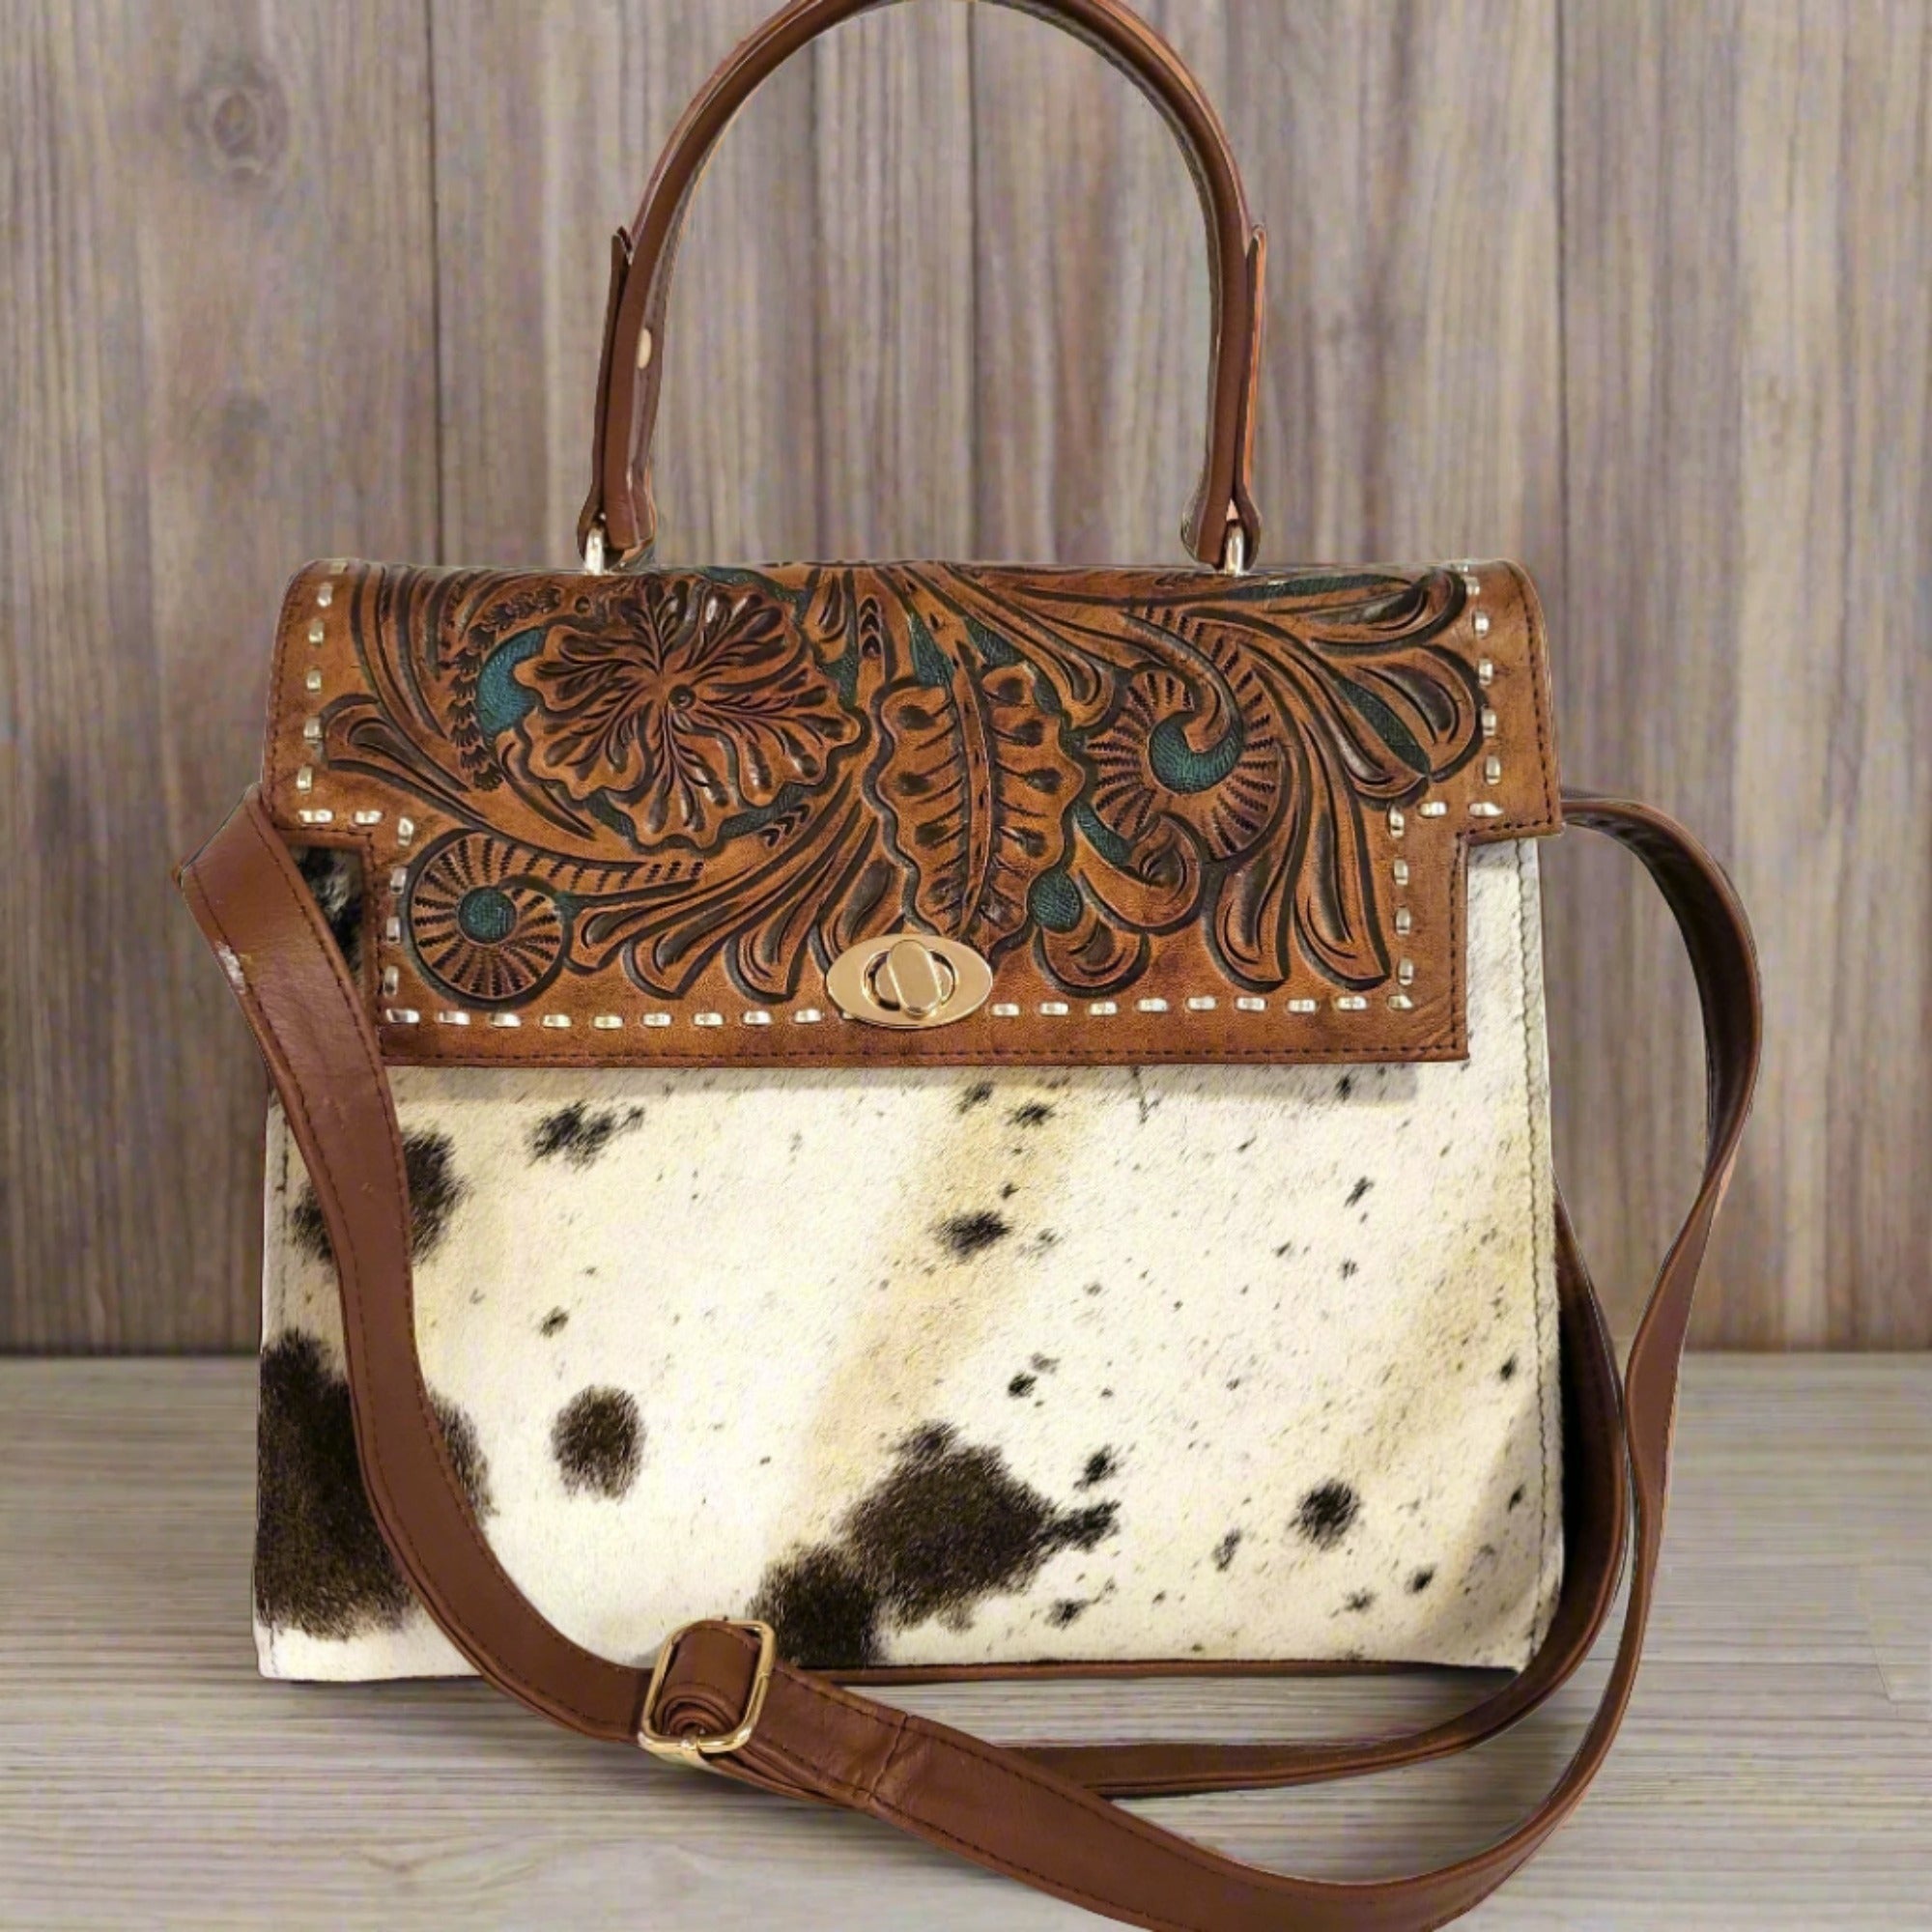 Hand tooled leather bag for women , Hand carved leather bag, Cowgirl leather bag, Shoulder Bag.